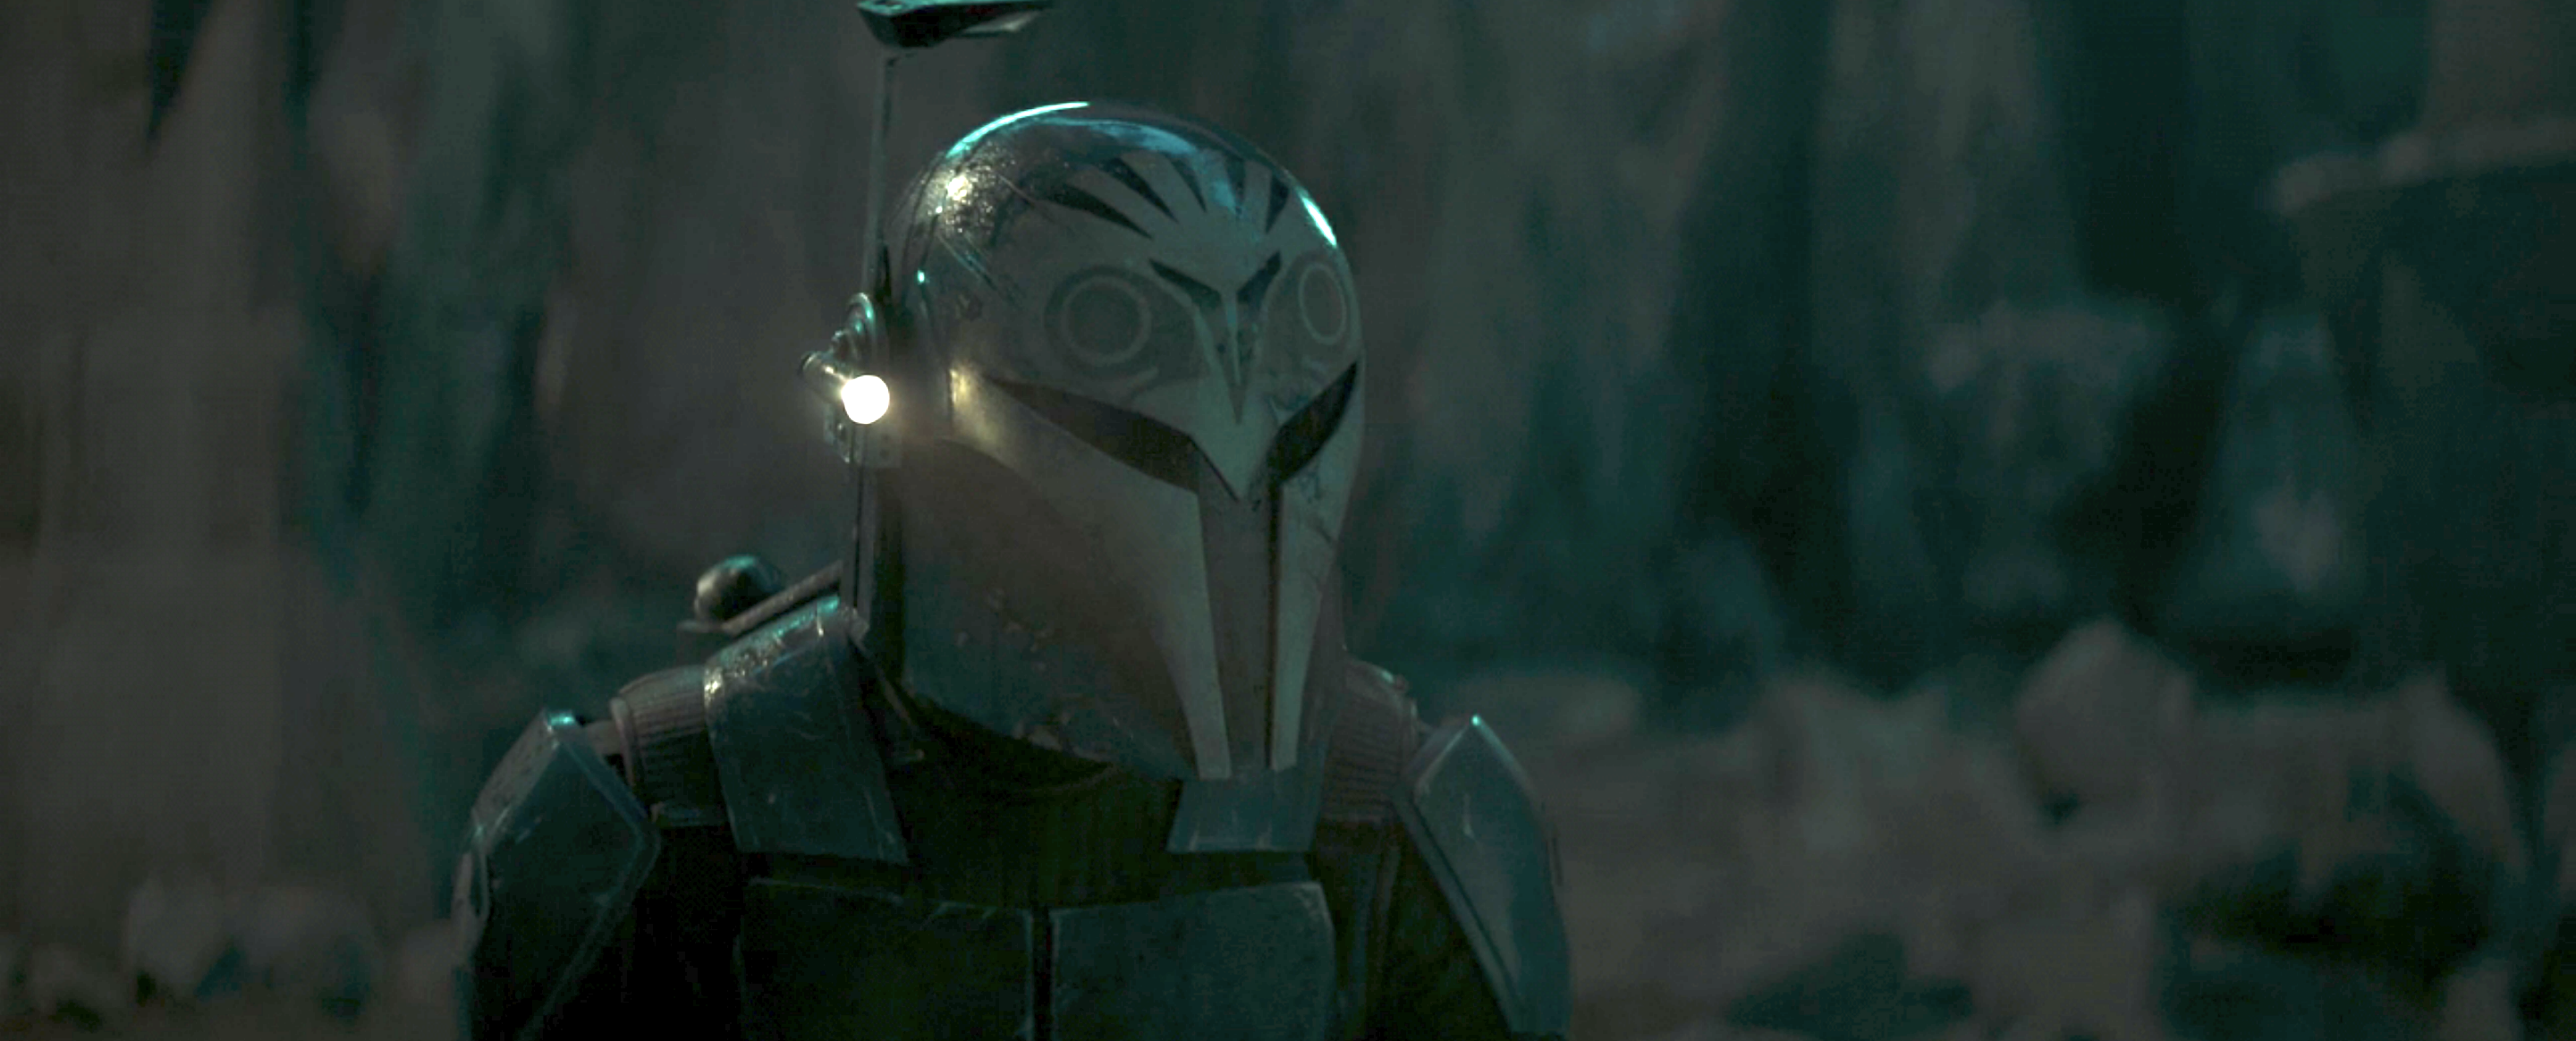 The Mandalorian's Mythosaur and Star Wars connections, explained - Polygon